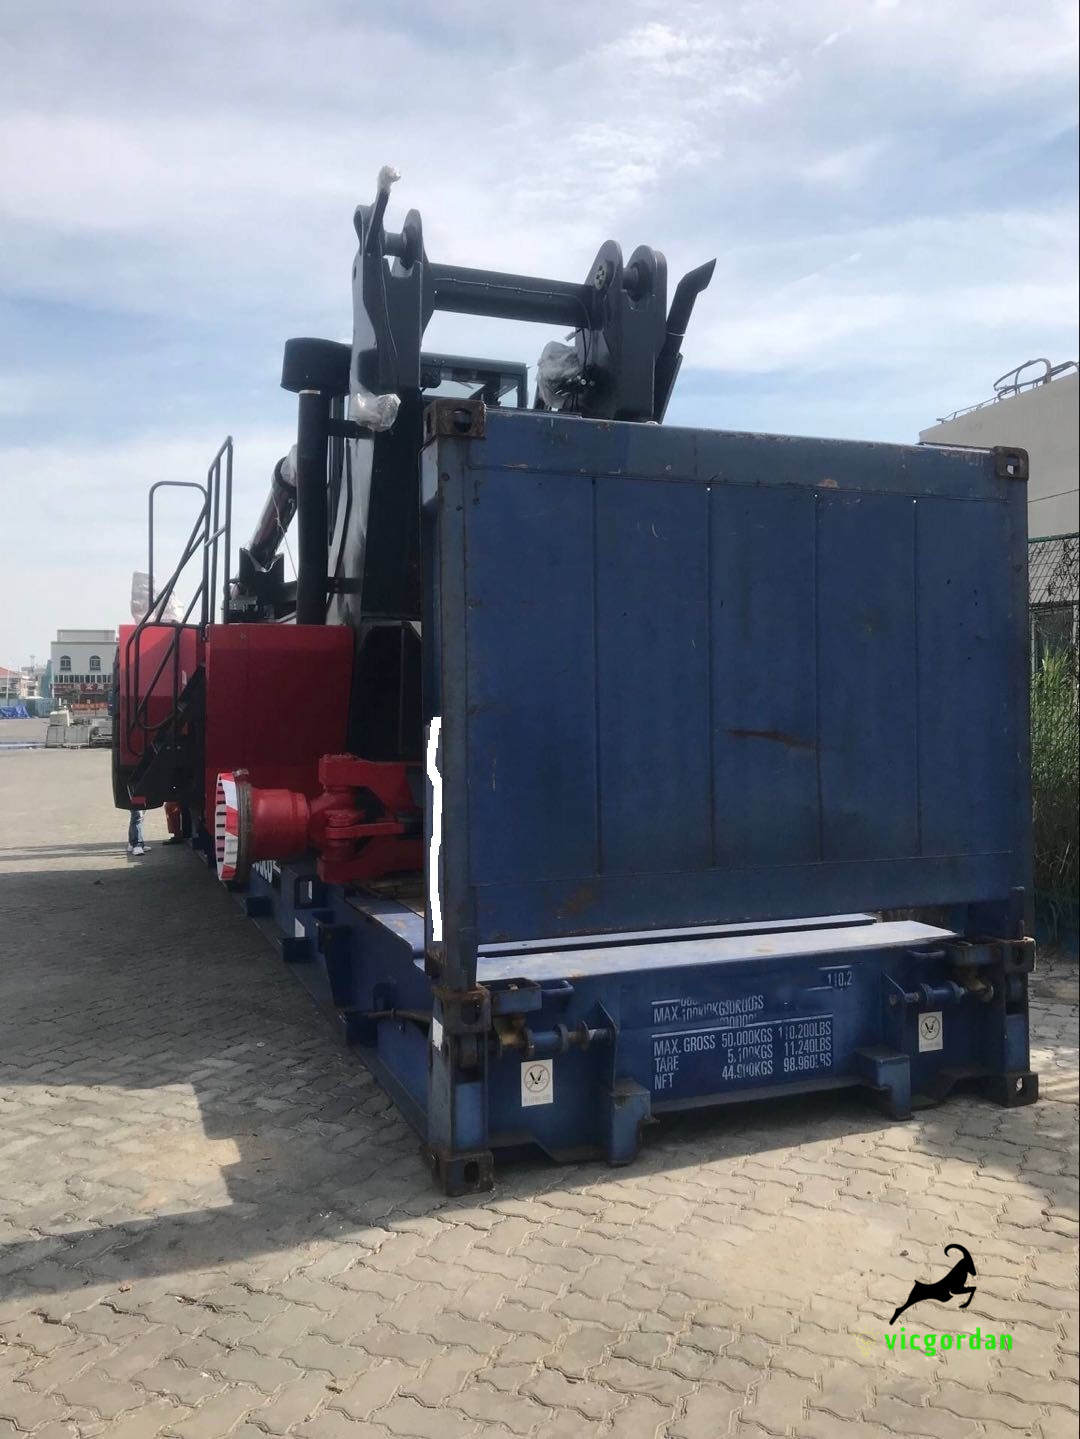 Vicgordan Port Equipment has been Delivered to MD area